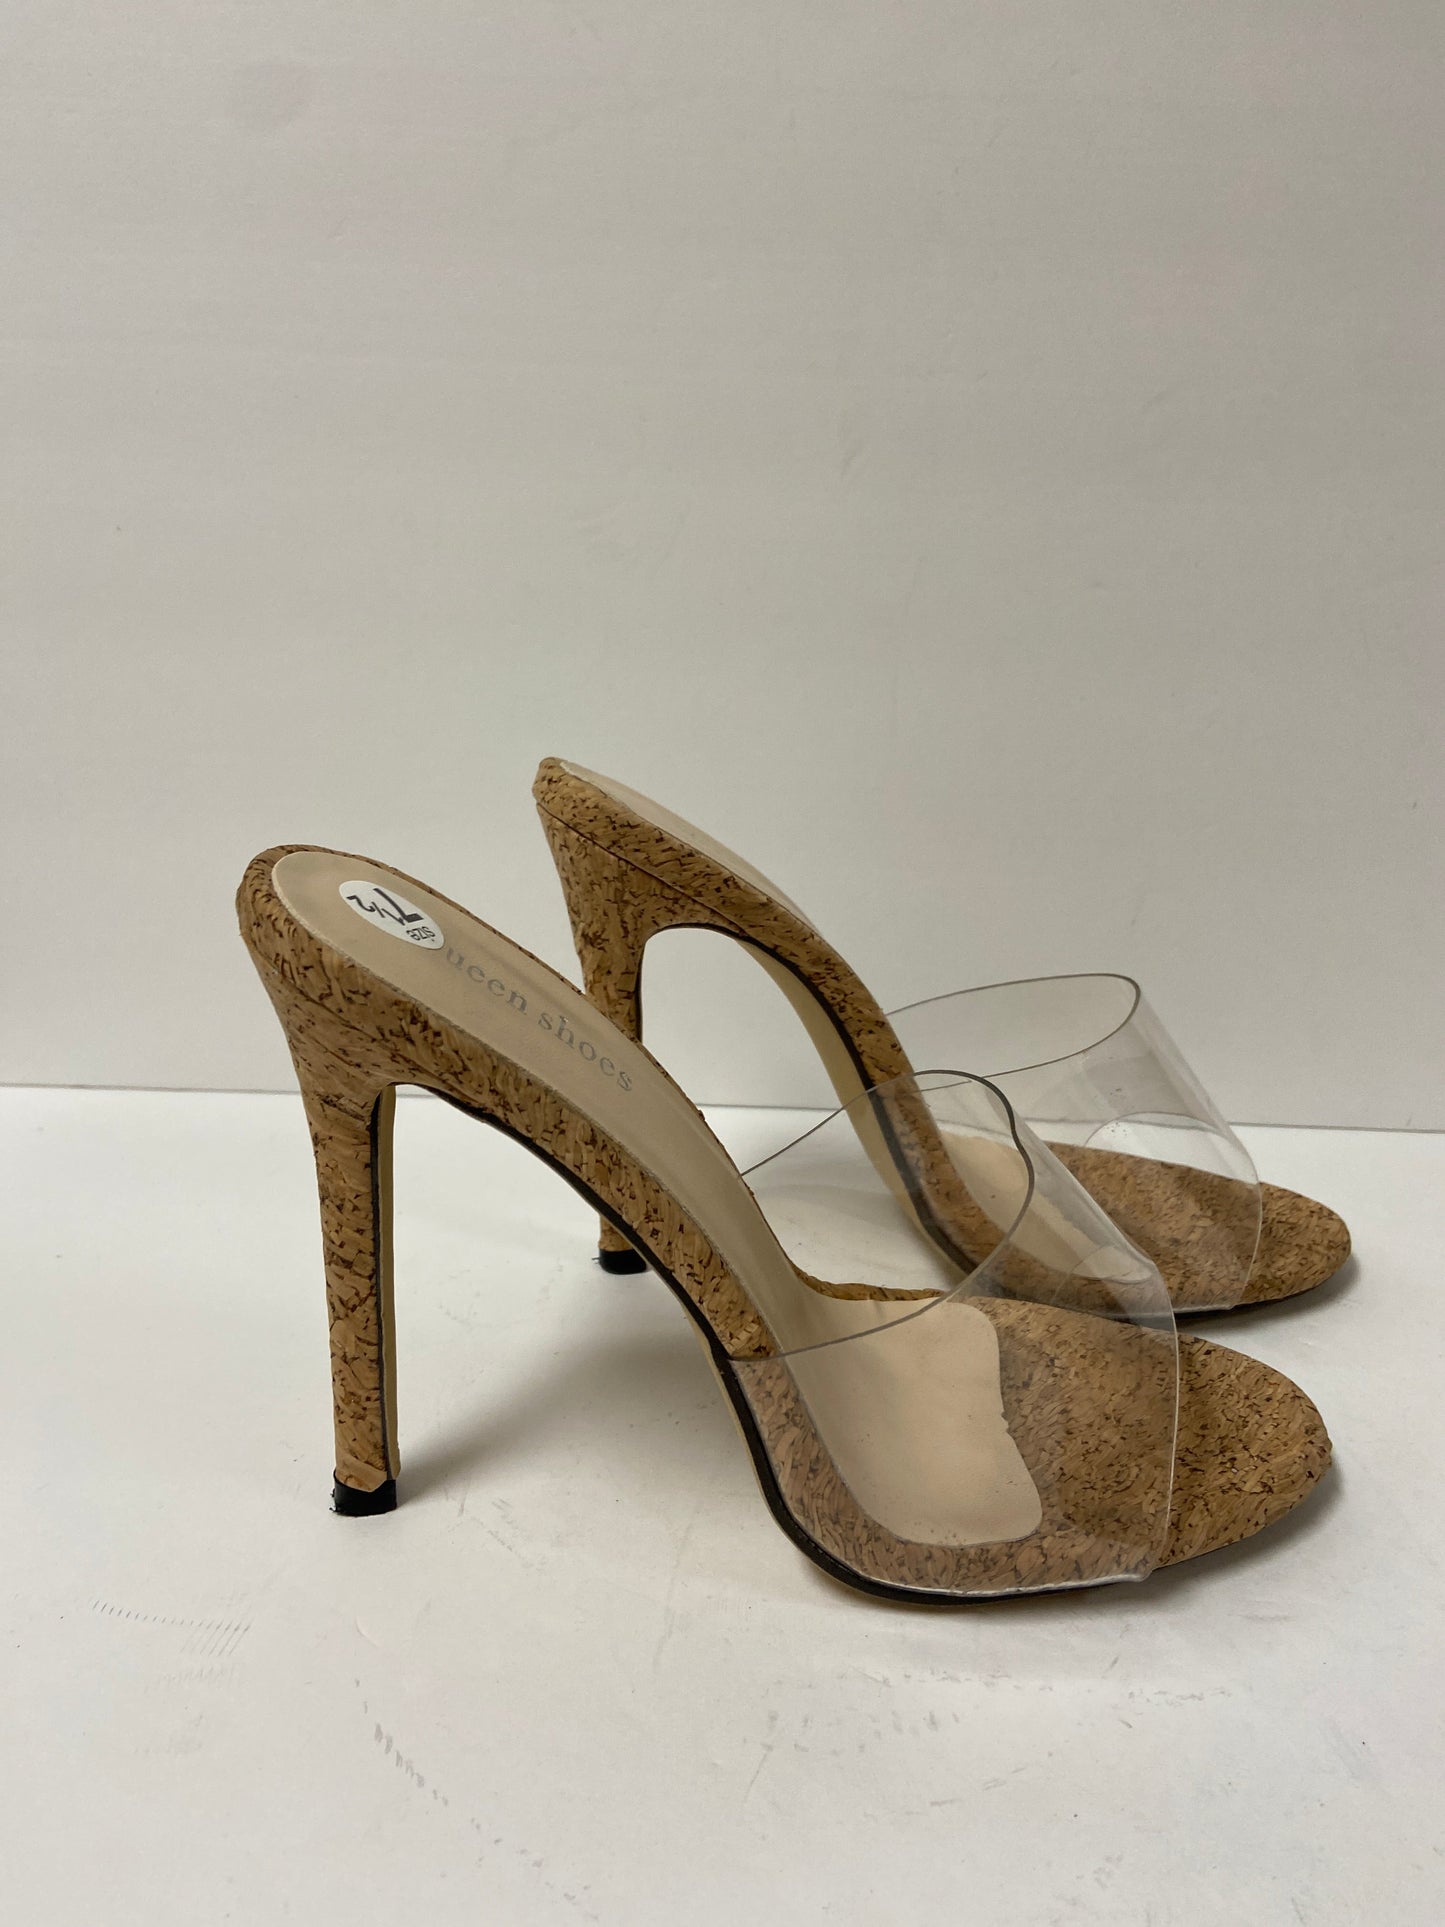 Shoes Heels Stiletto By Clothes Mentor  Size: 7.5